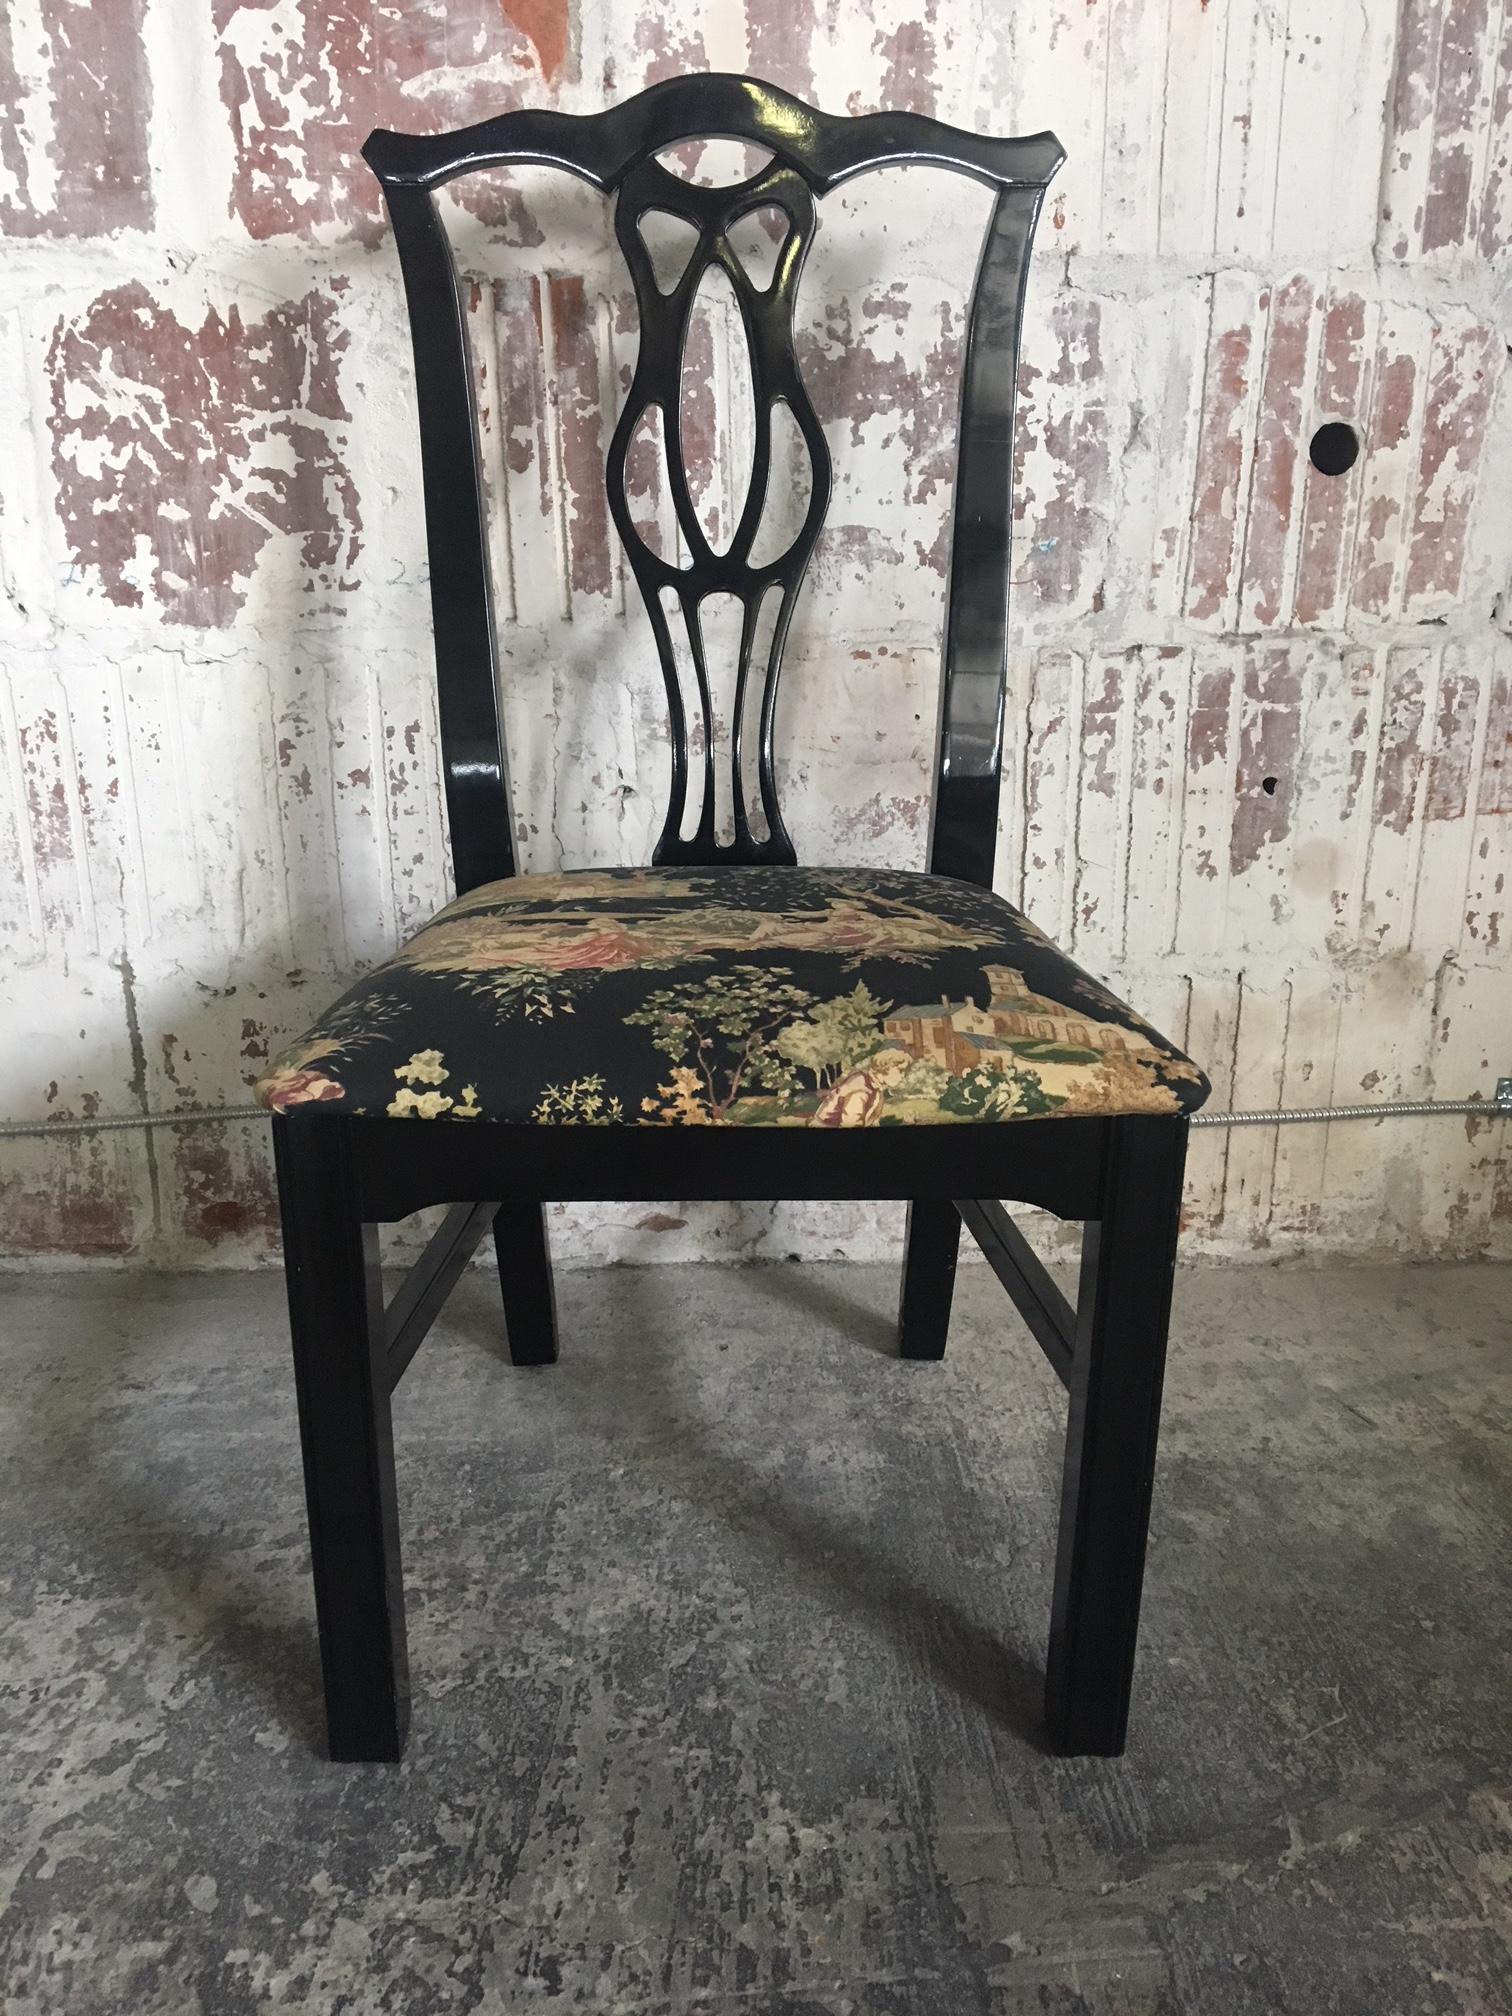 Set of six Chippendale dining chairs in Asian chinoiserie style. Featuring straight legs and Asian-themed upholstery. Set consists of two arm chairs and four side chairs. Very good vintage condition with only minor signs of age appropriate use. Set